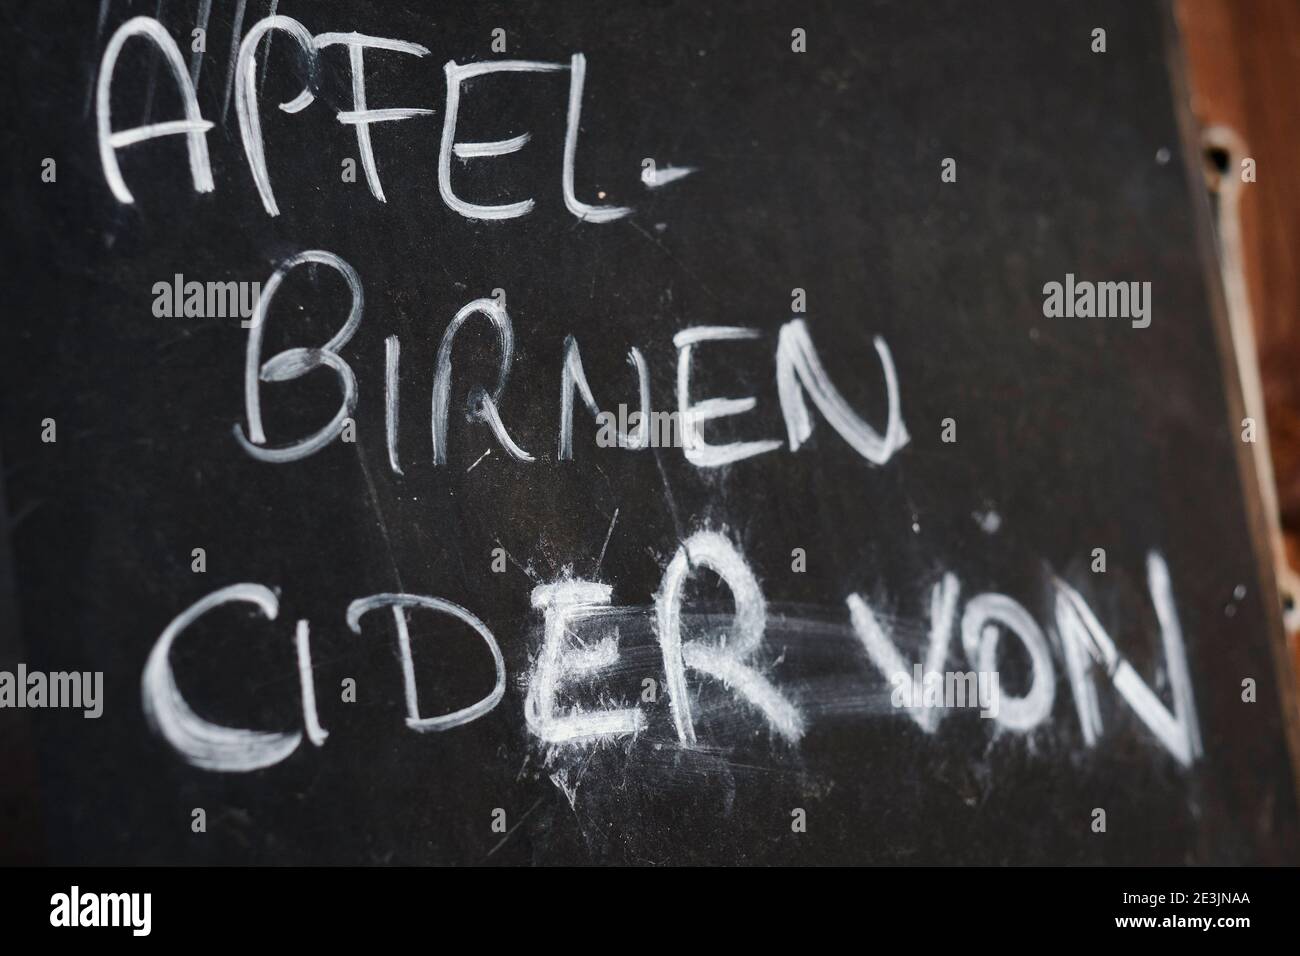 blackboard with handwritten words for apple, pear and cider in german langugae Stock Photo